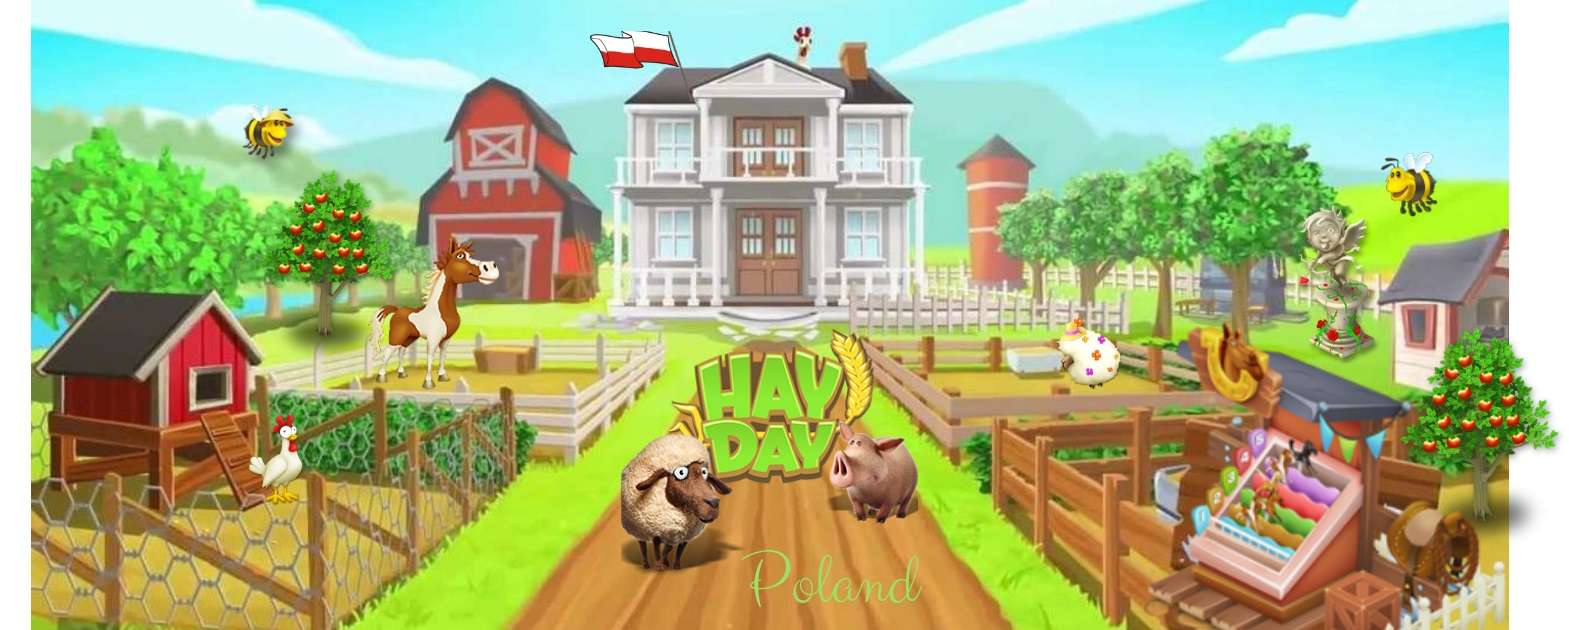 Hay Day Poland Play Jigsaw Puzzle For Free At Puzzle Factory - hayday logo roblox